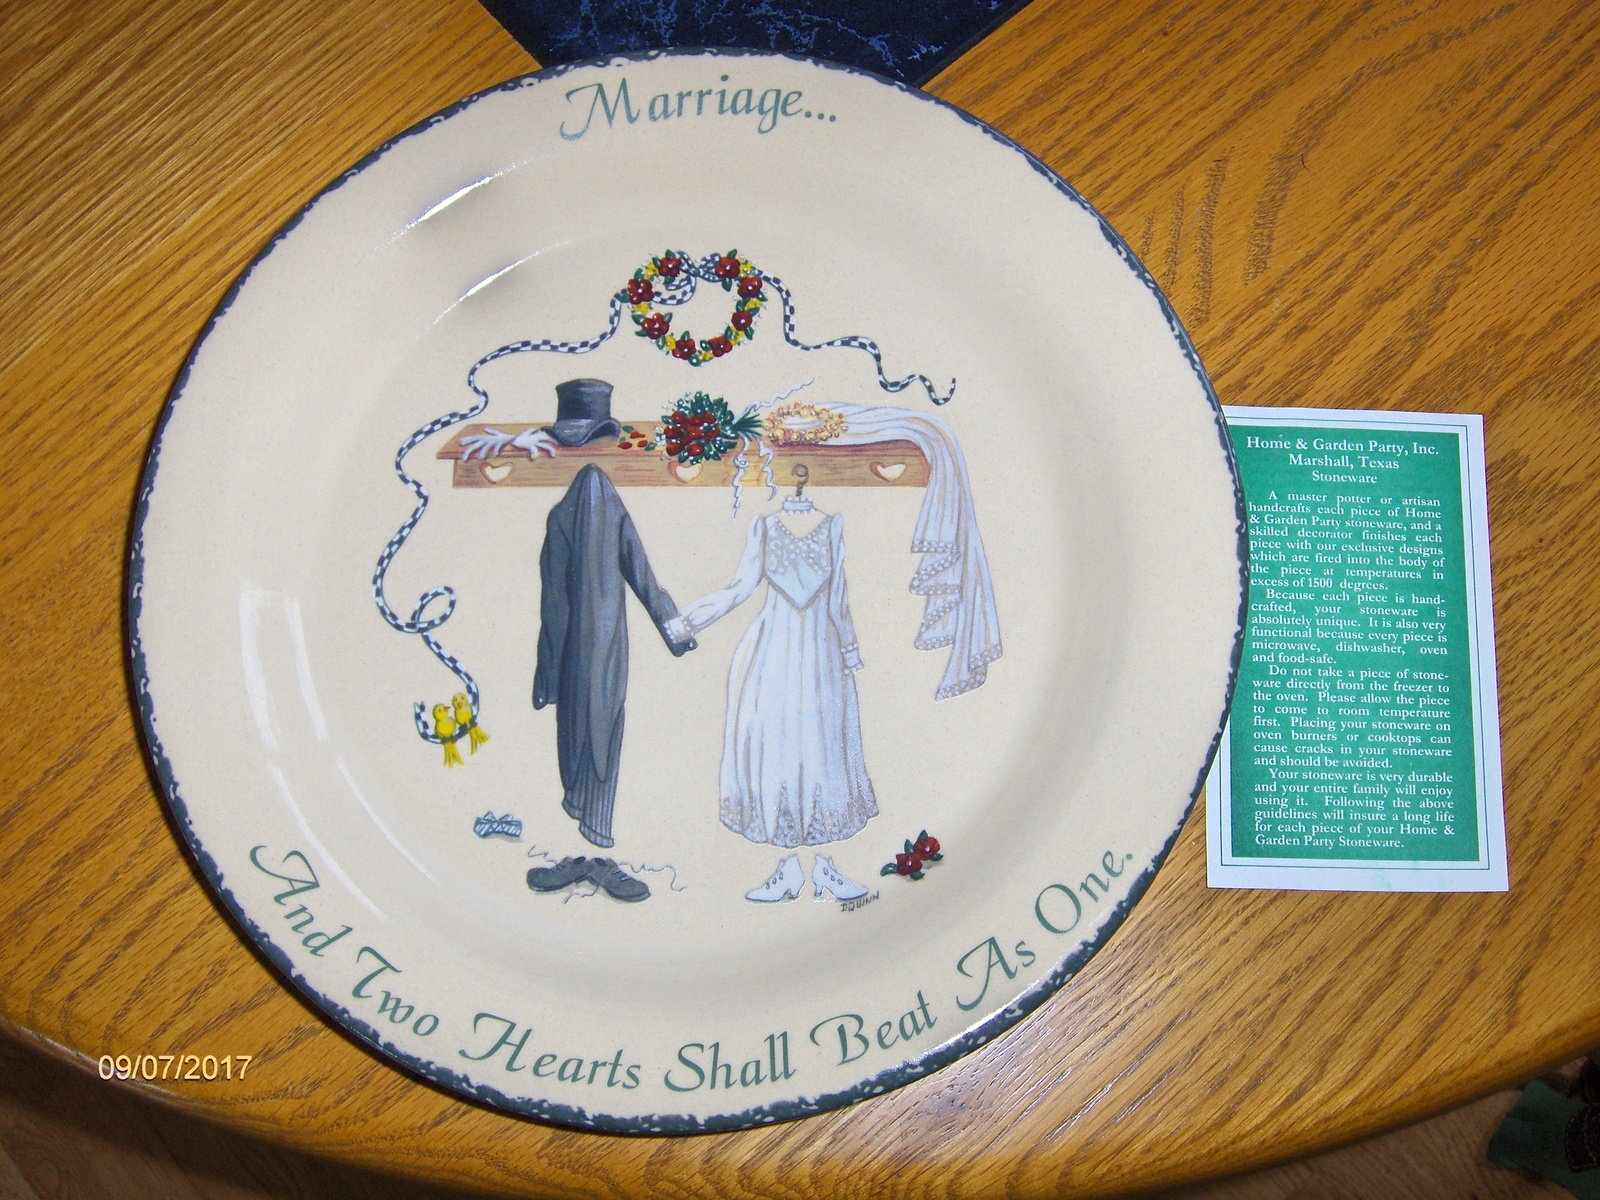 Home & Garden Party 2001 Marriage And Two Hearts Shall Beat As One Pie Dish - $39.97